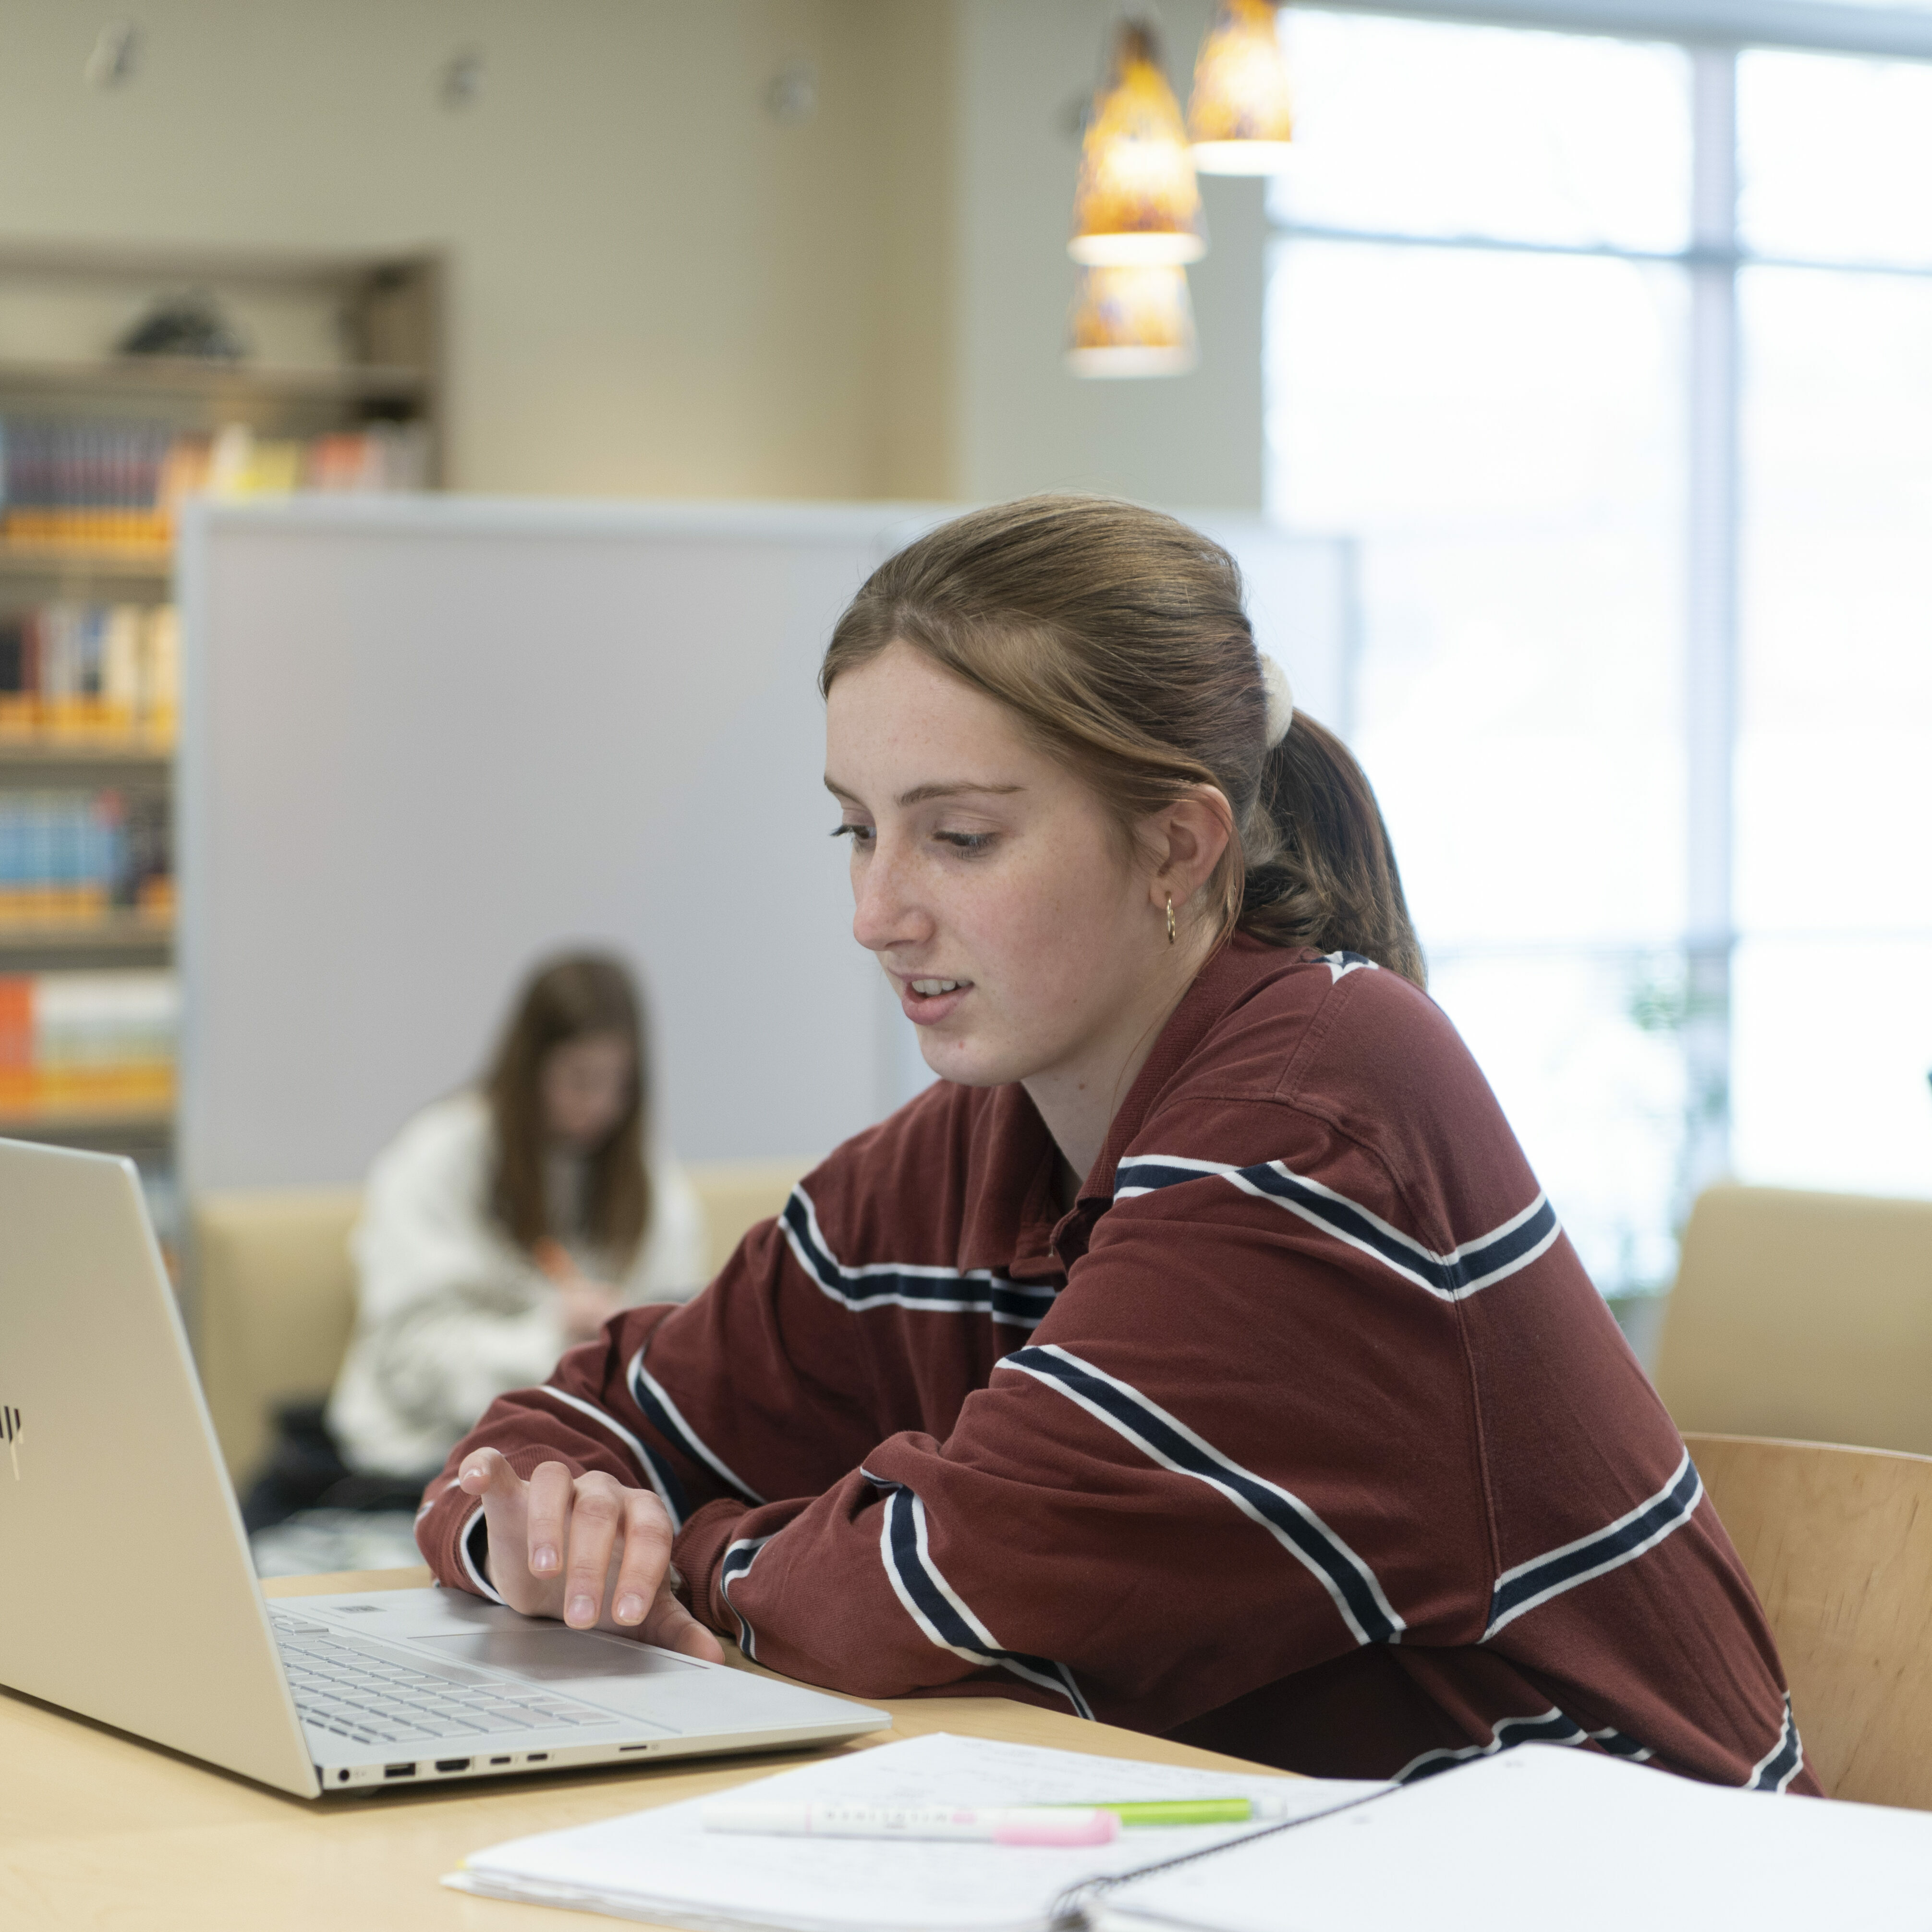 A female student works on a laptop in the library